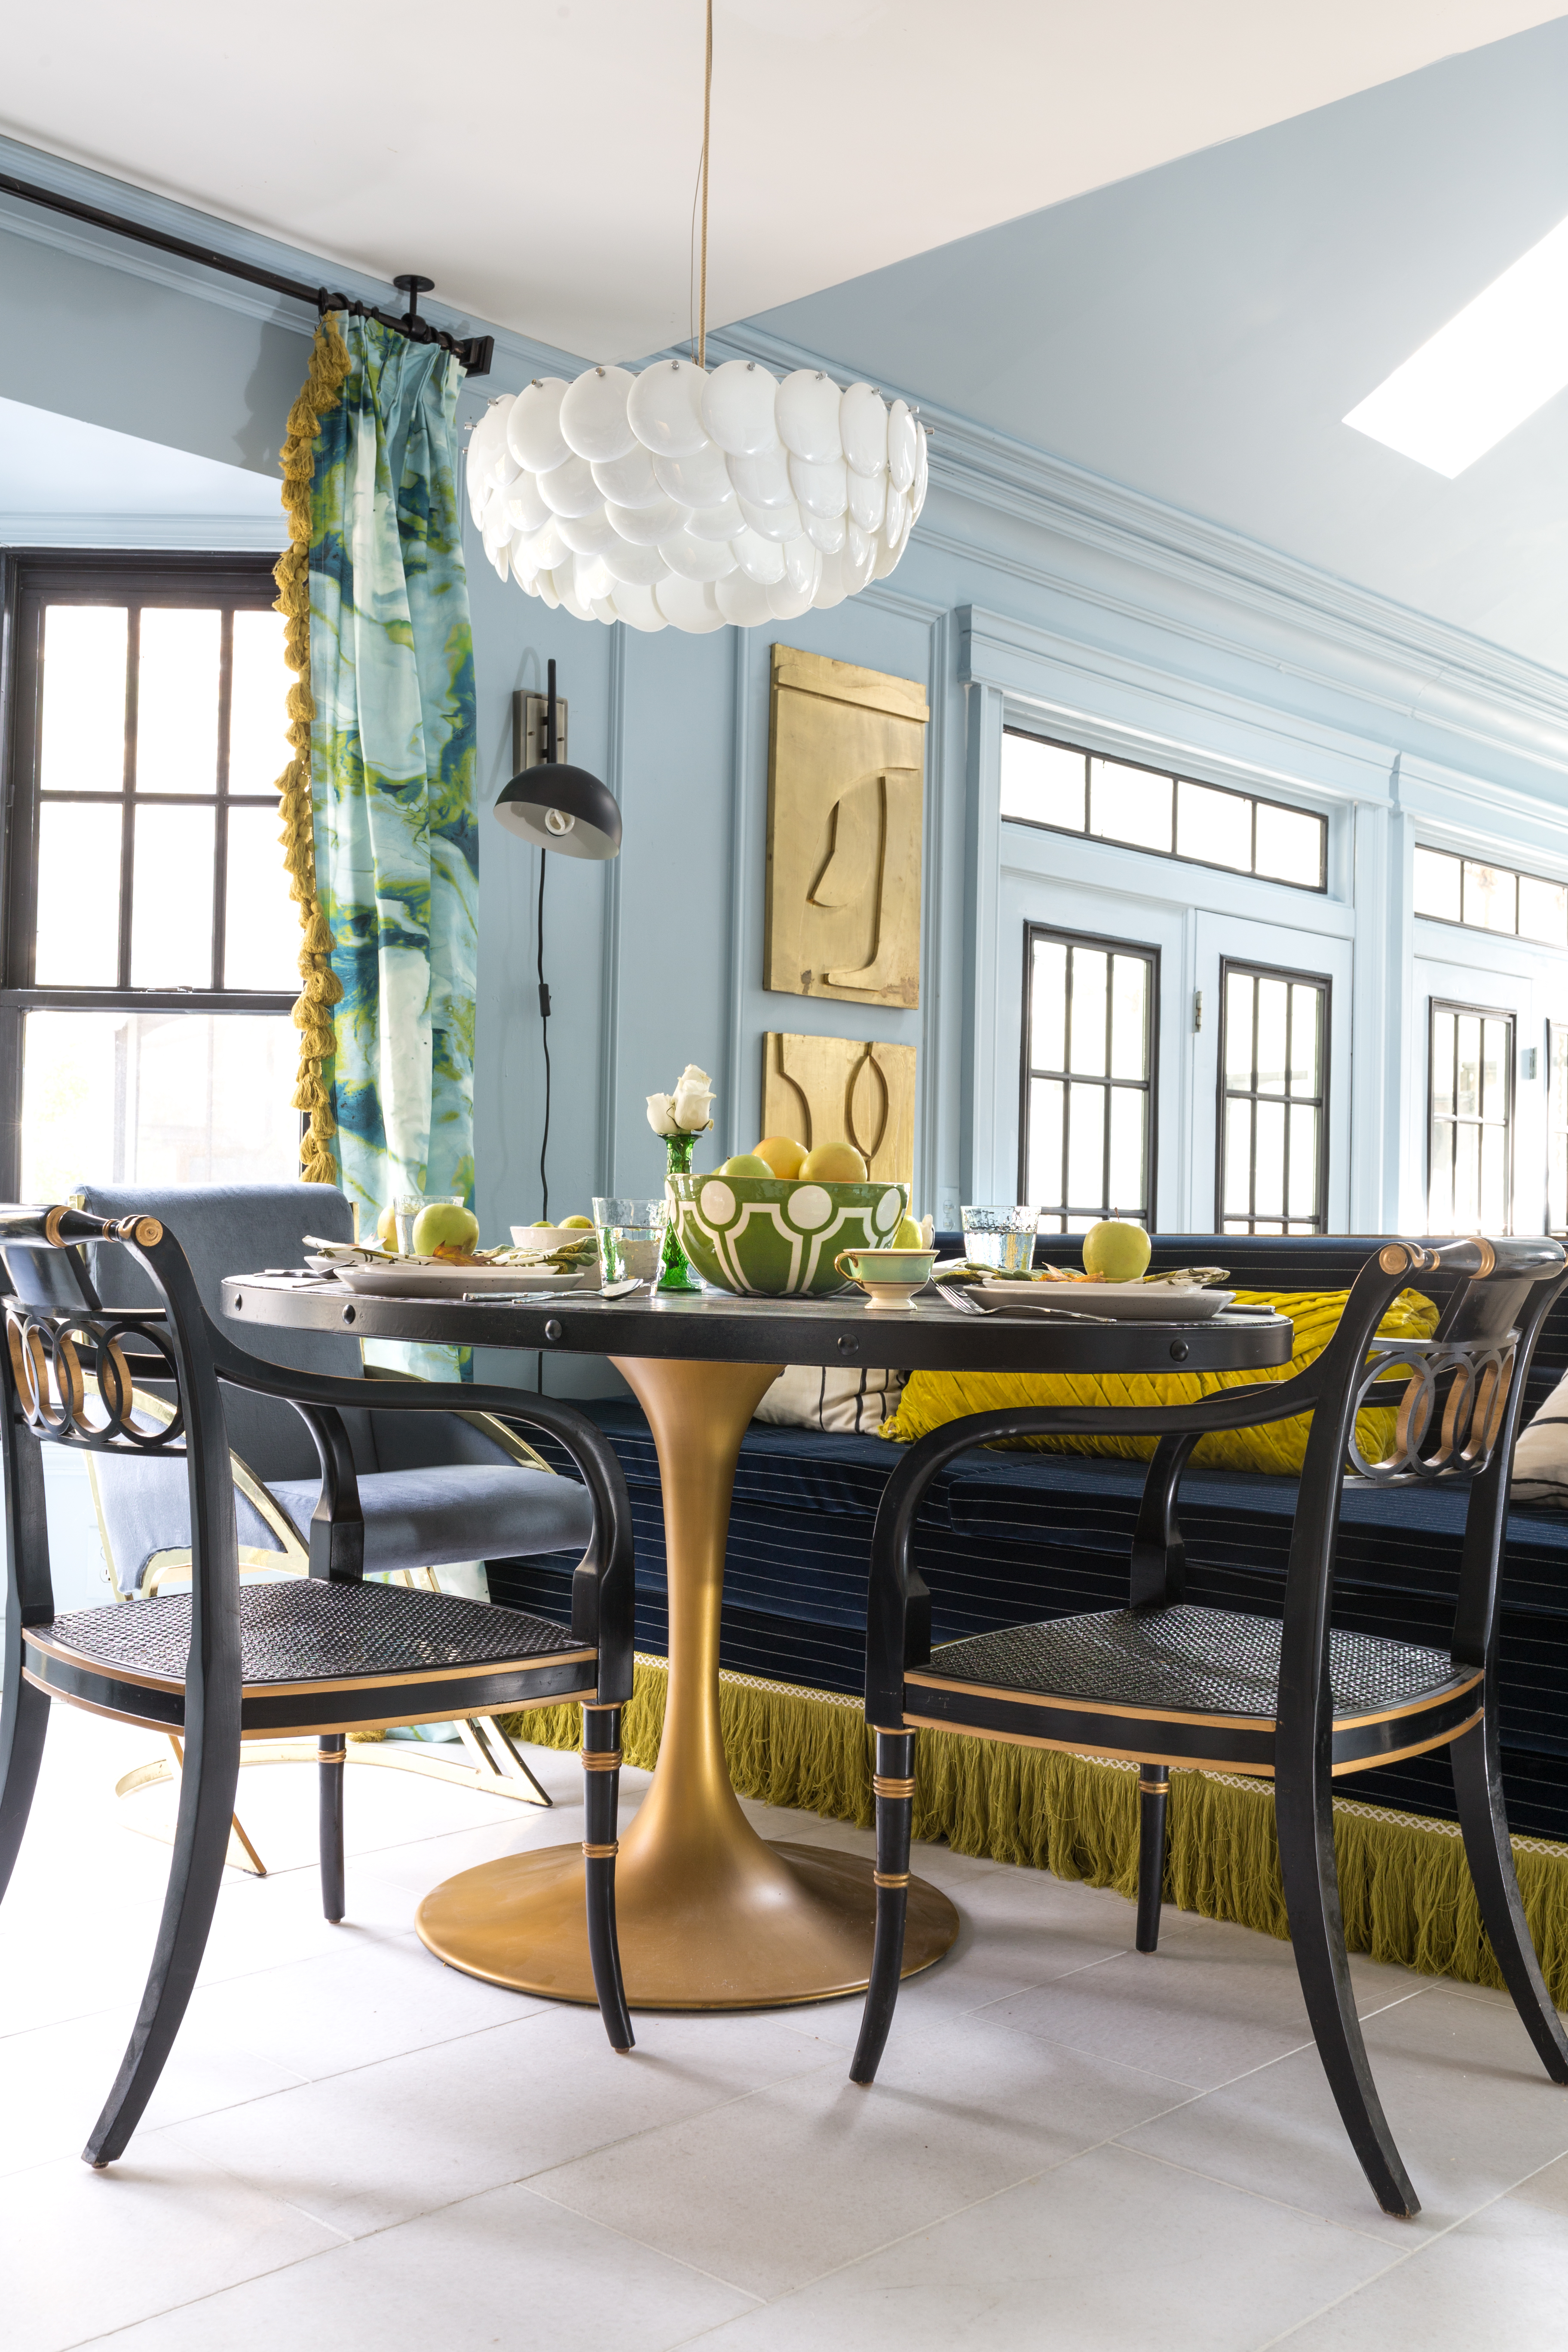 Jeweled Interiors fall 2019 ORC, eat in, dining room, Original BTC, Pembridge, pendant, chandelier banquette, channel tufted, fringed